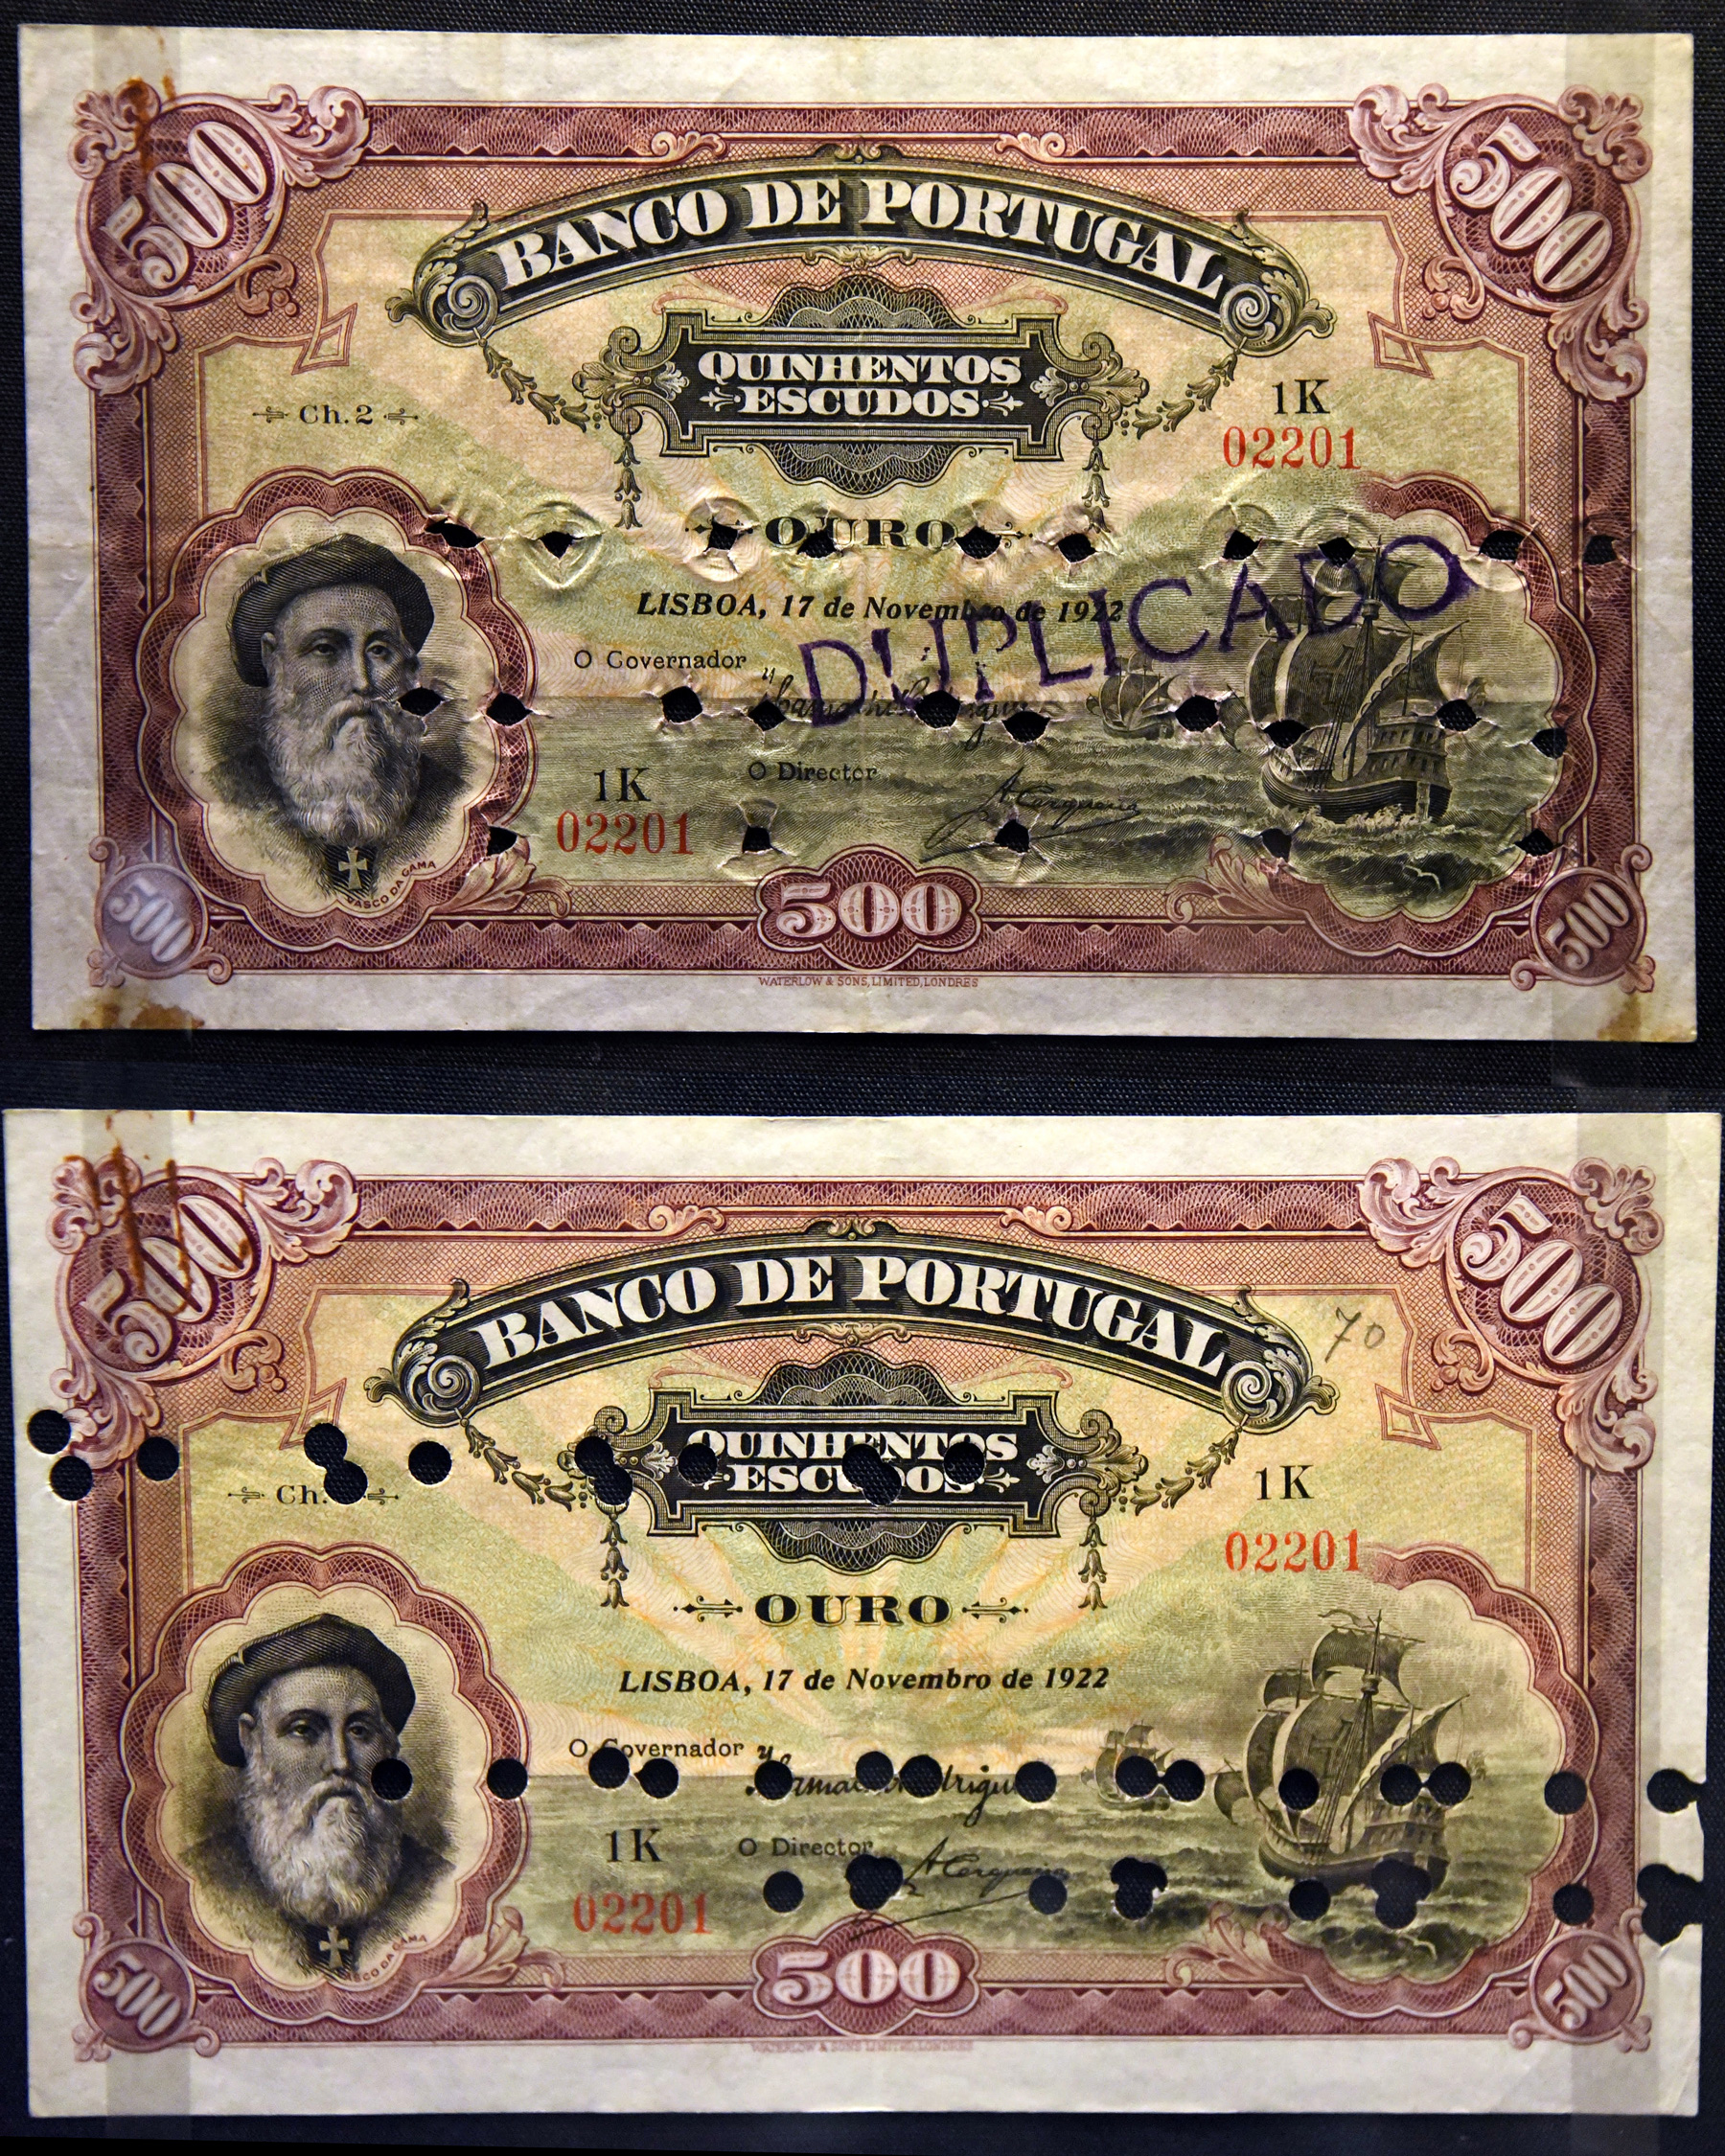 A counterfeit 500 escudo note and the real one (Wikipedia)